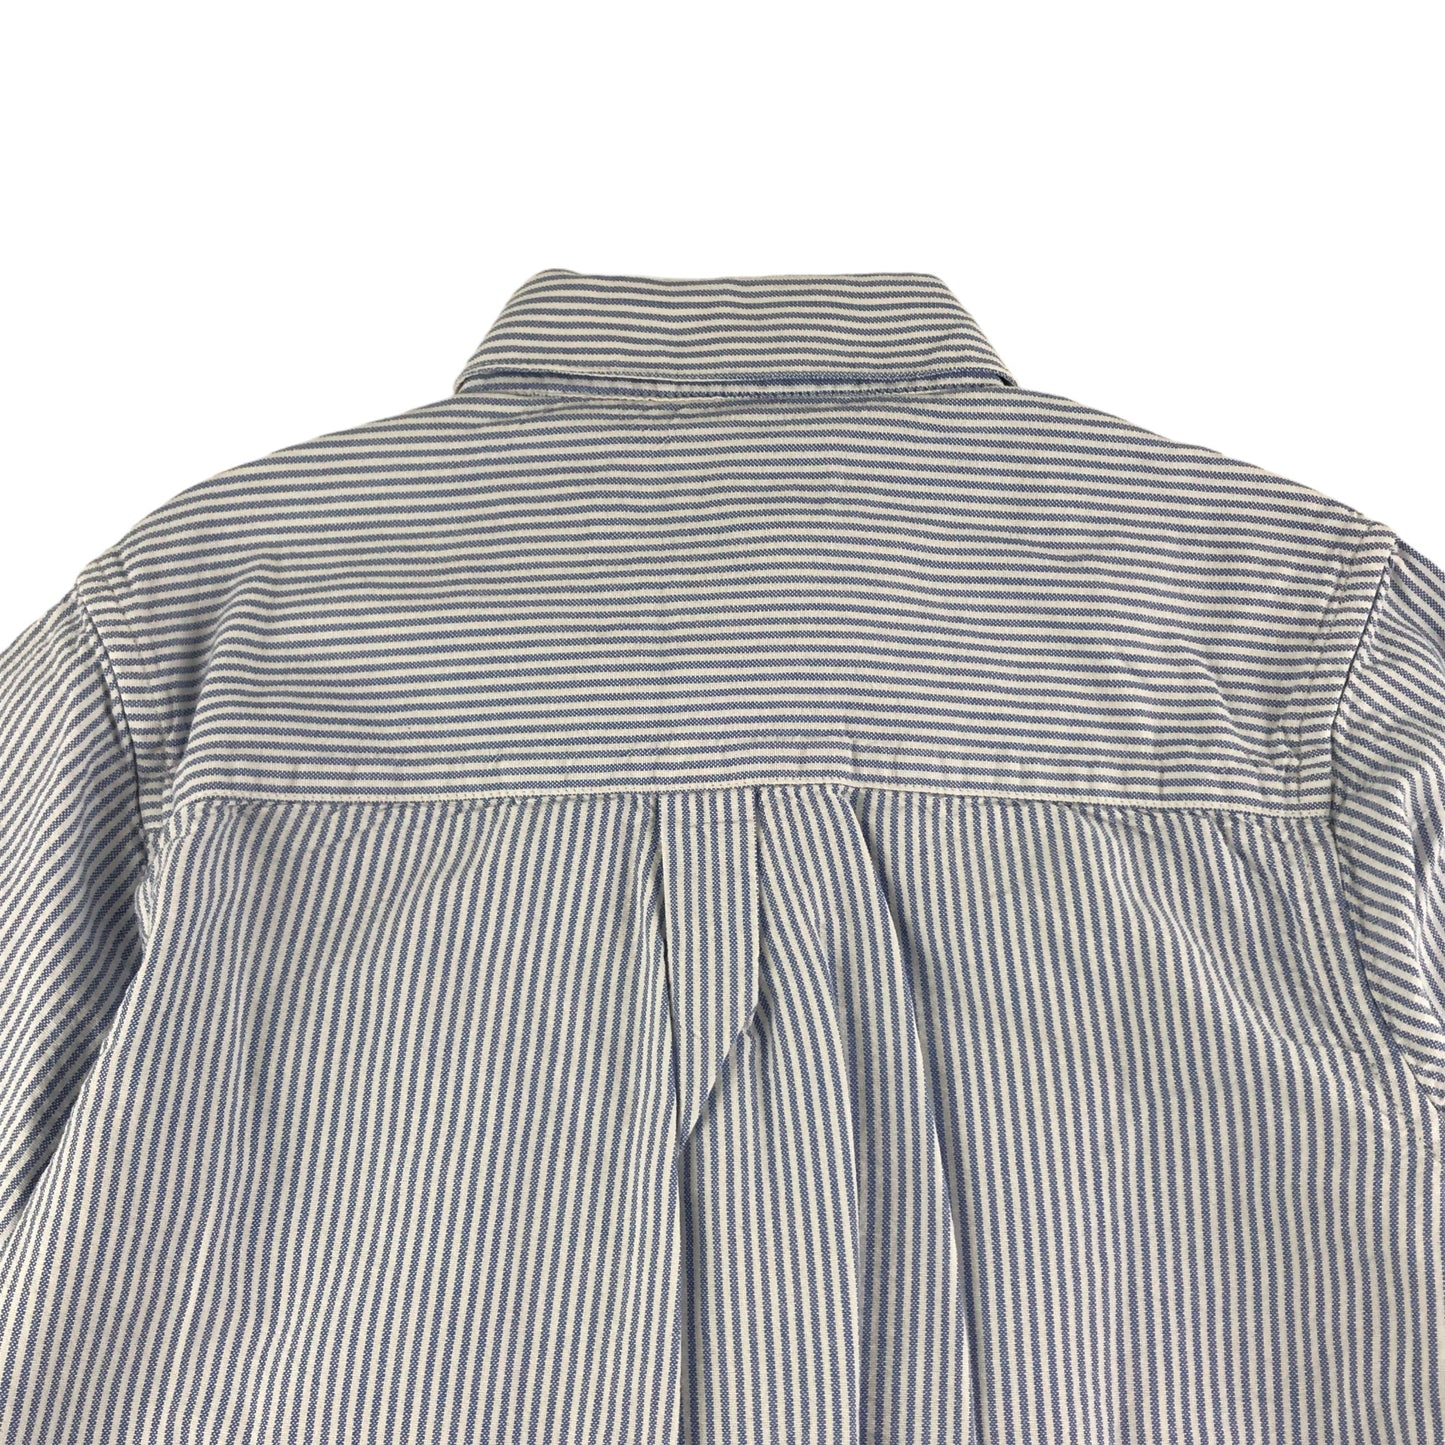 John Lewis Shirt Age 10 Blue White Stripy Heirloom Collection Long Sleeve Button Up Cotton